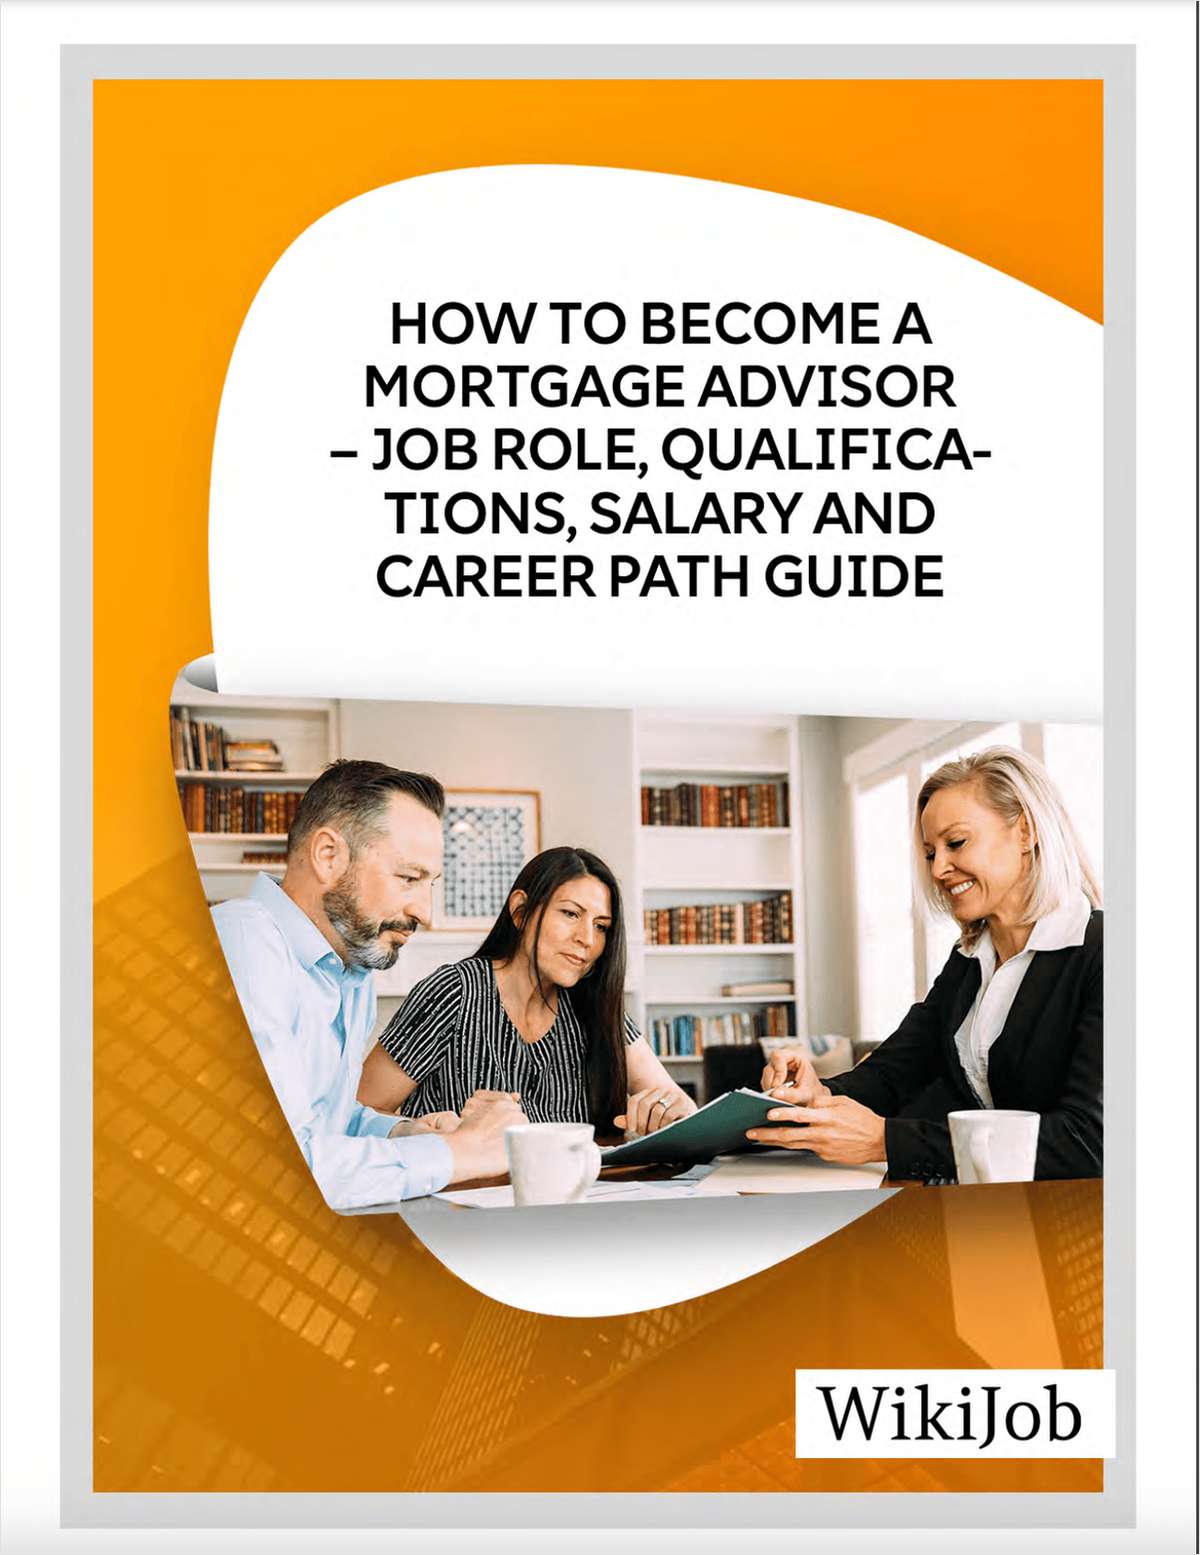 How to Become a Mortgage Advisor -- Job Role, Qualifications, Salary and Career Path Guide